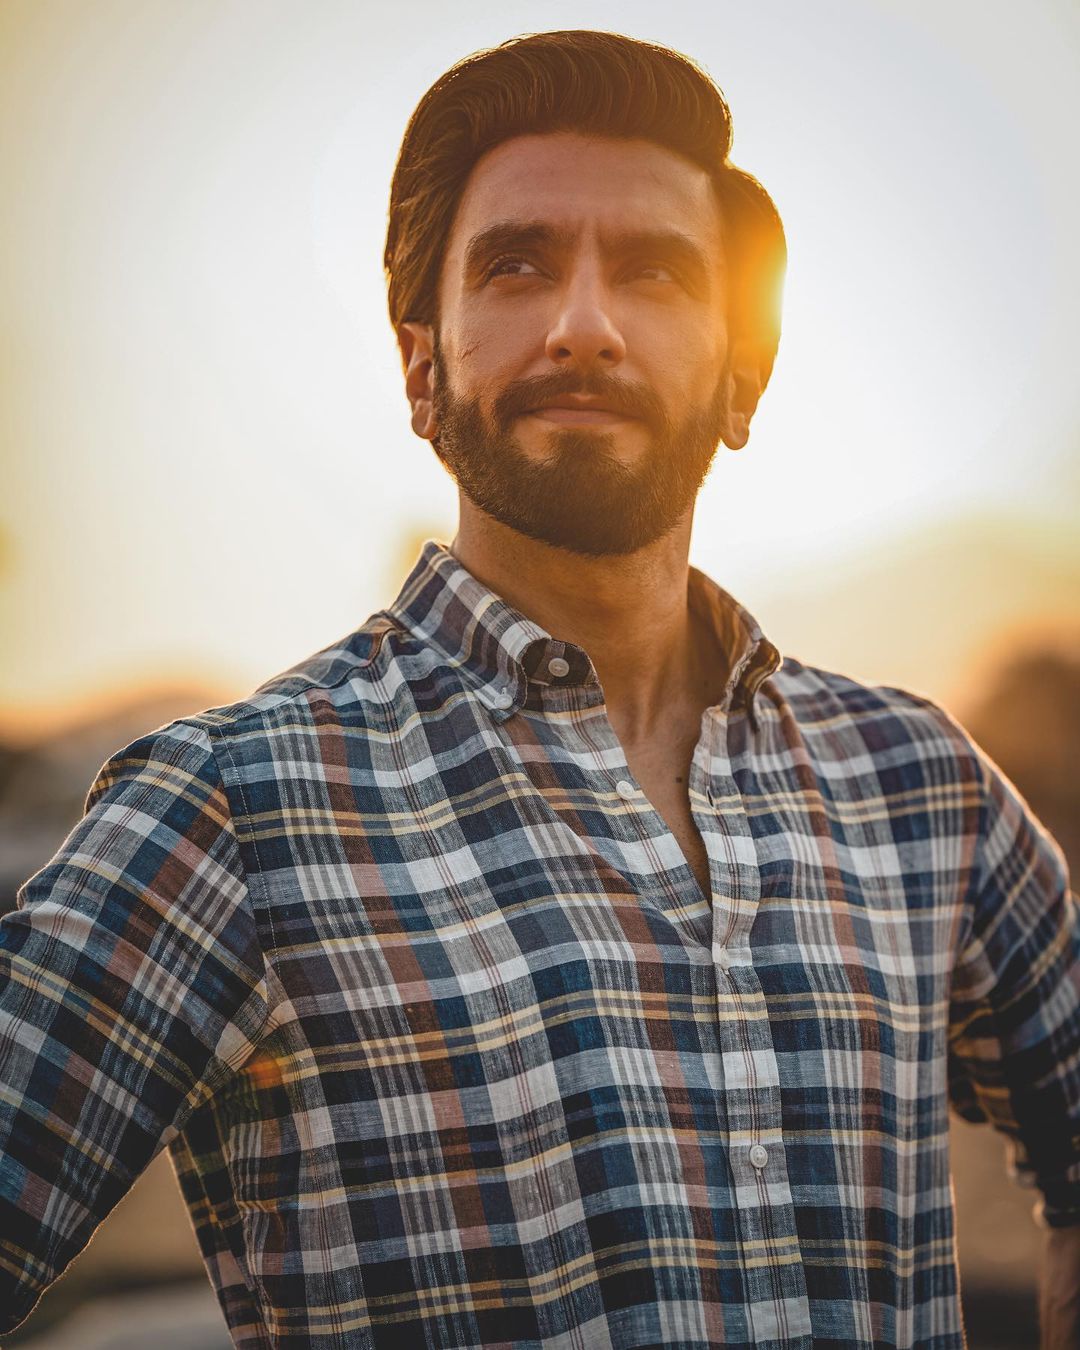 Rug from Ranveer's naked photoshoot cost over Rs 6 lakh? - Articles